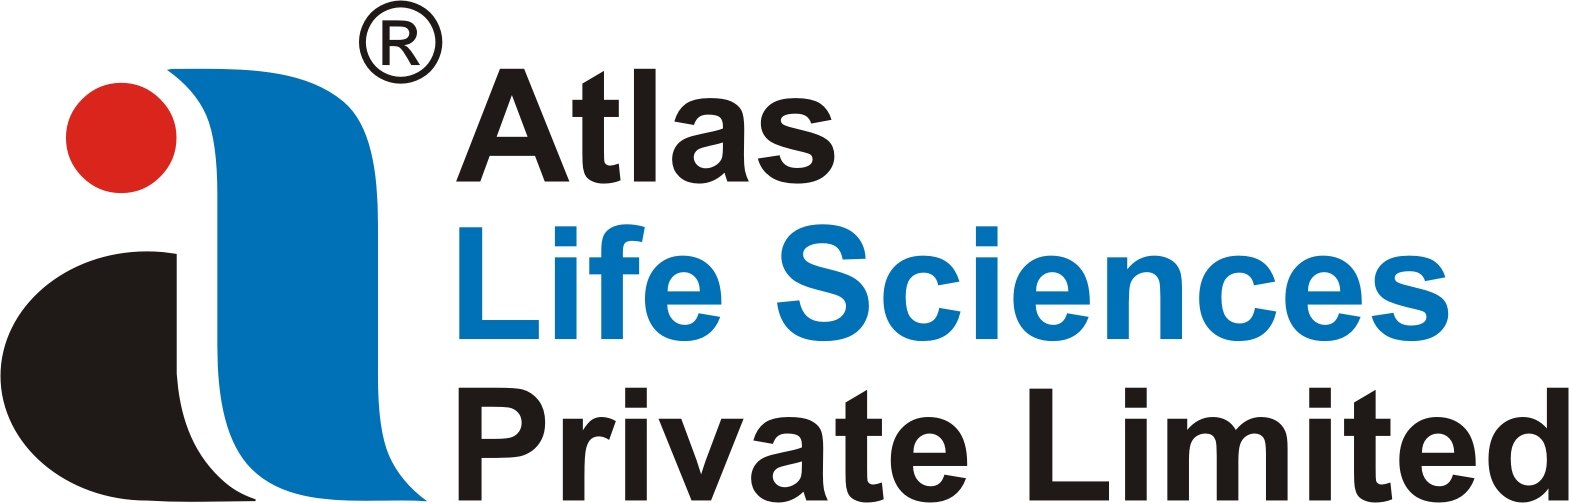 Atlas Life Sciences Private Limited